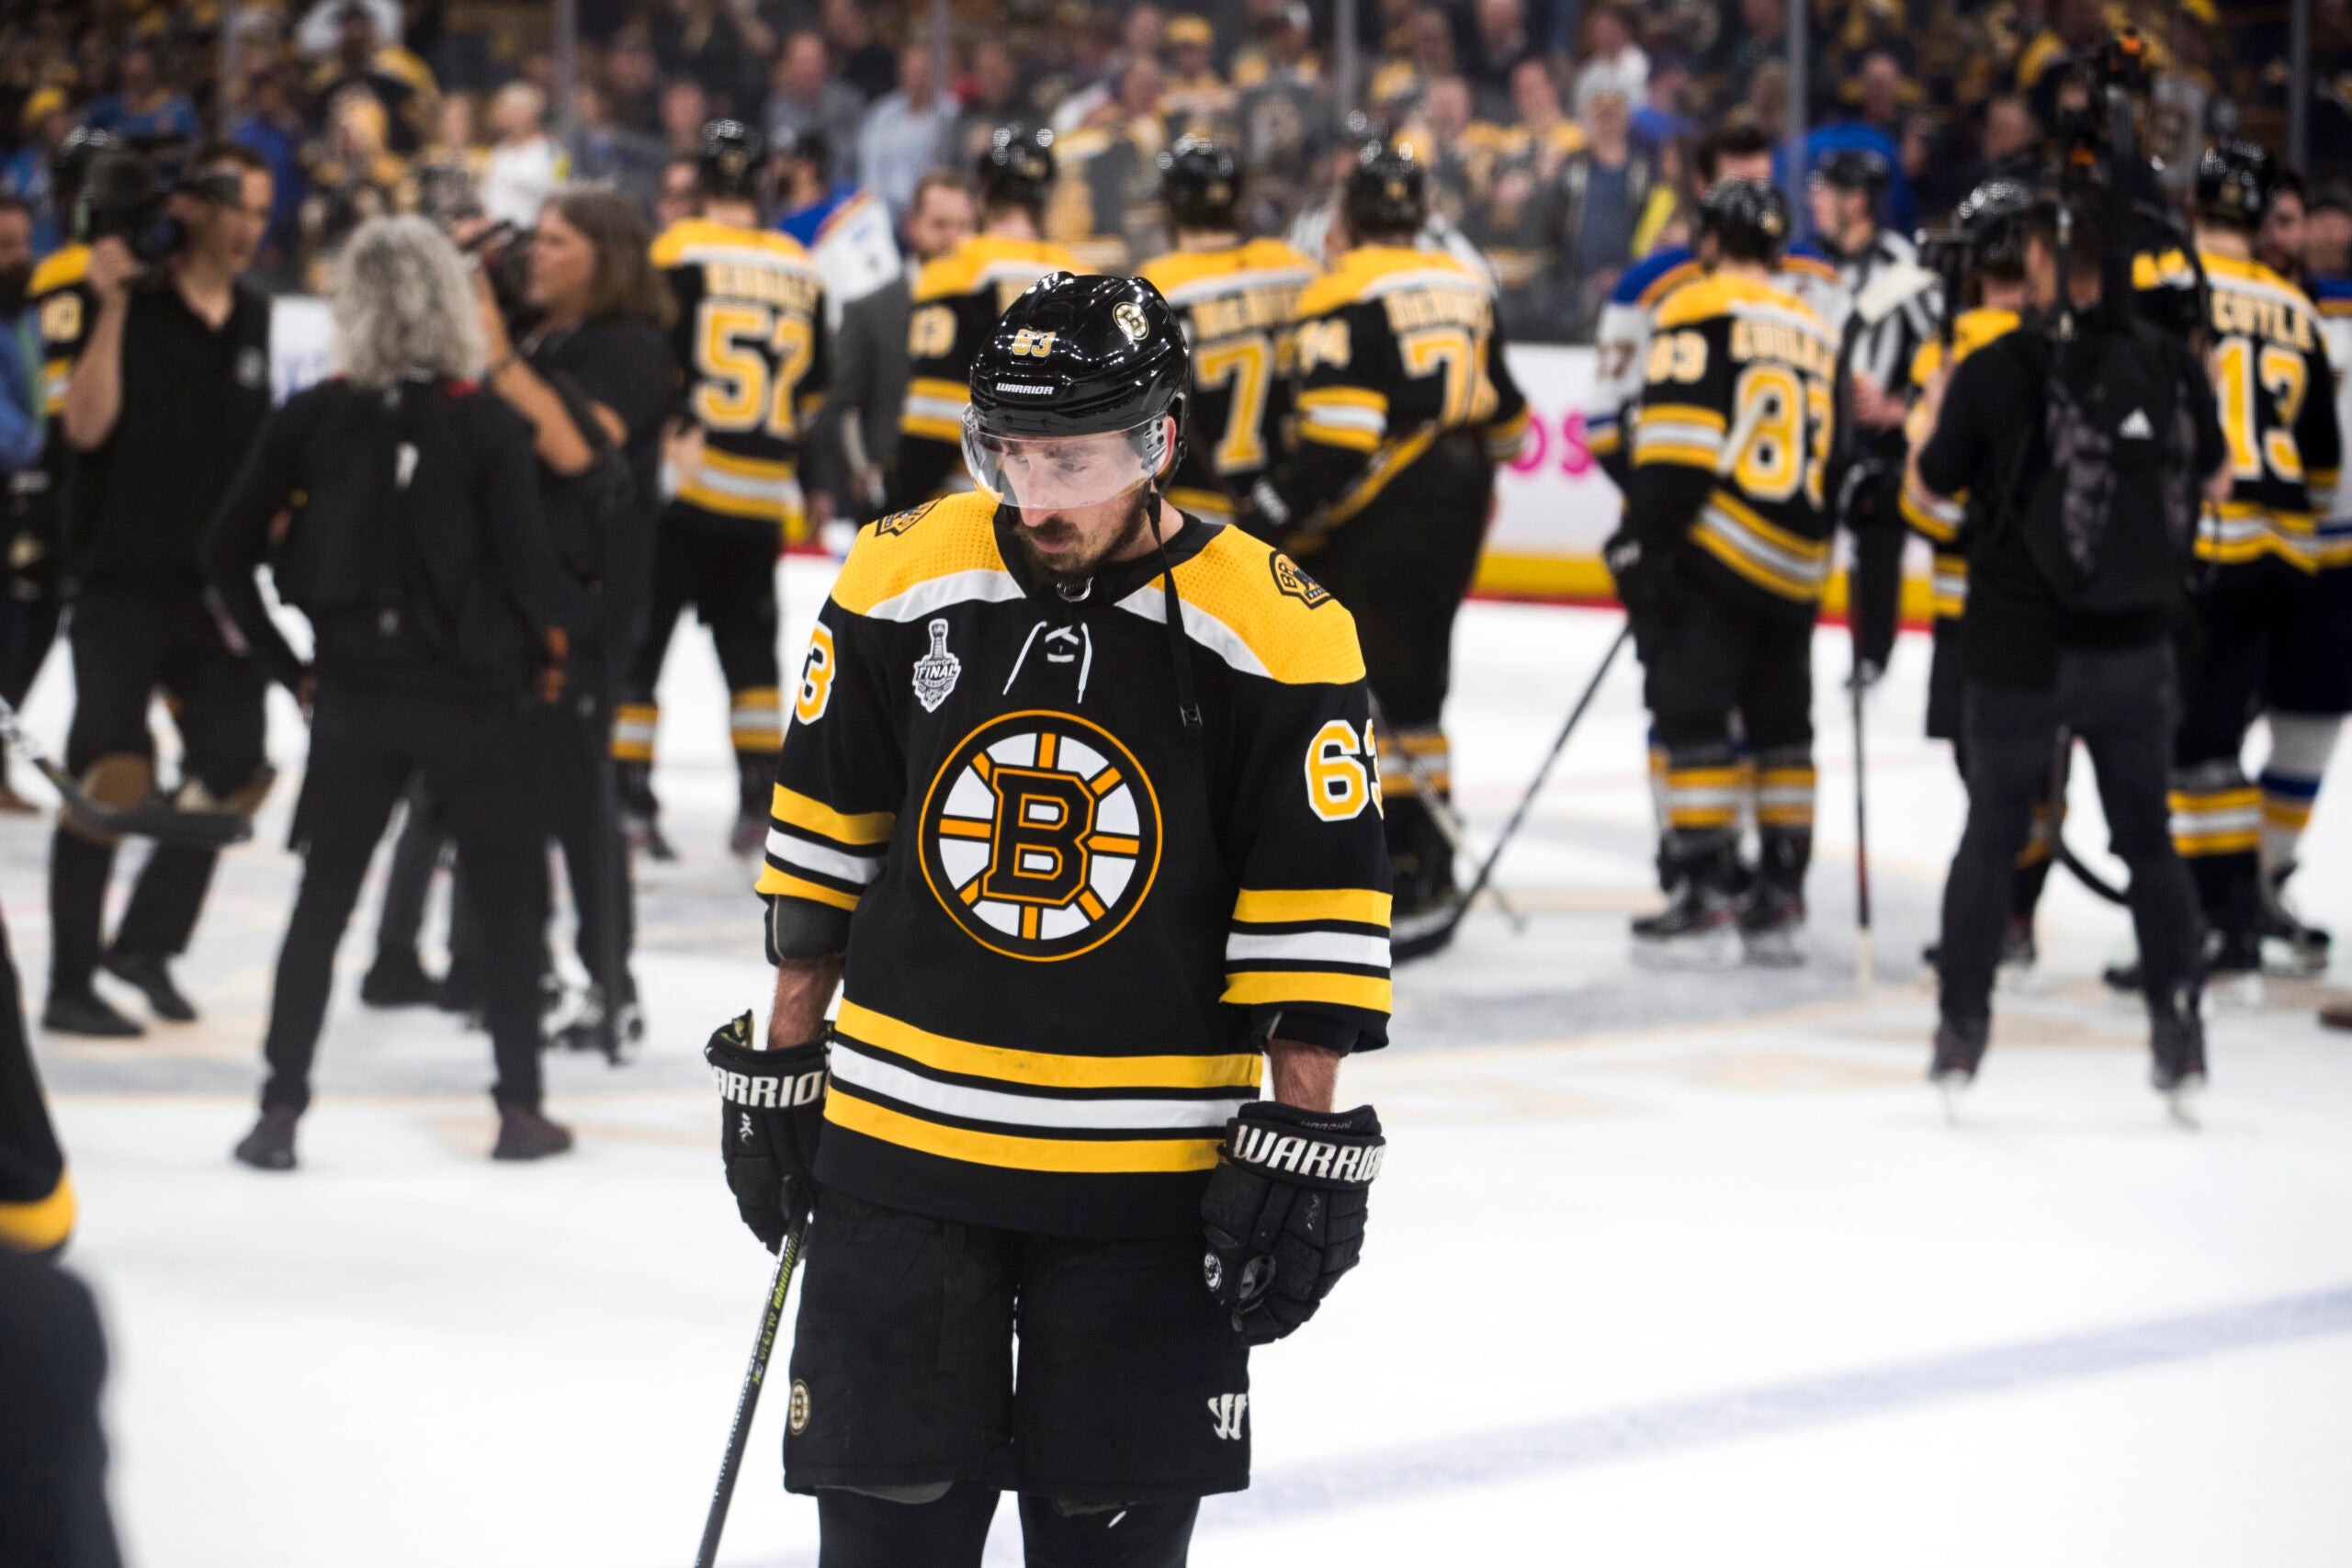 Boston Bruins Brad Marchand sends clear message to Montreal Canadiens after  Patrice Bergeron hit Shirt